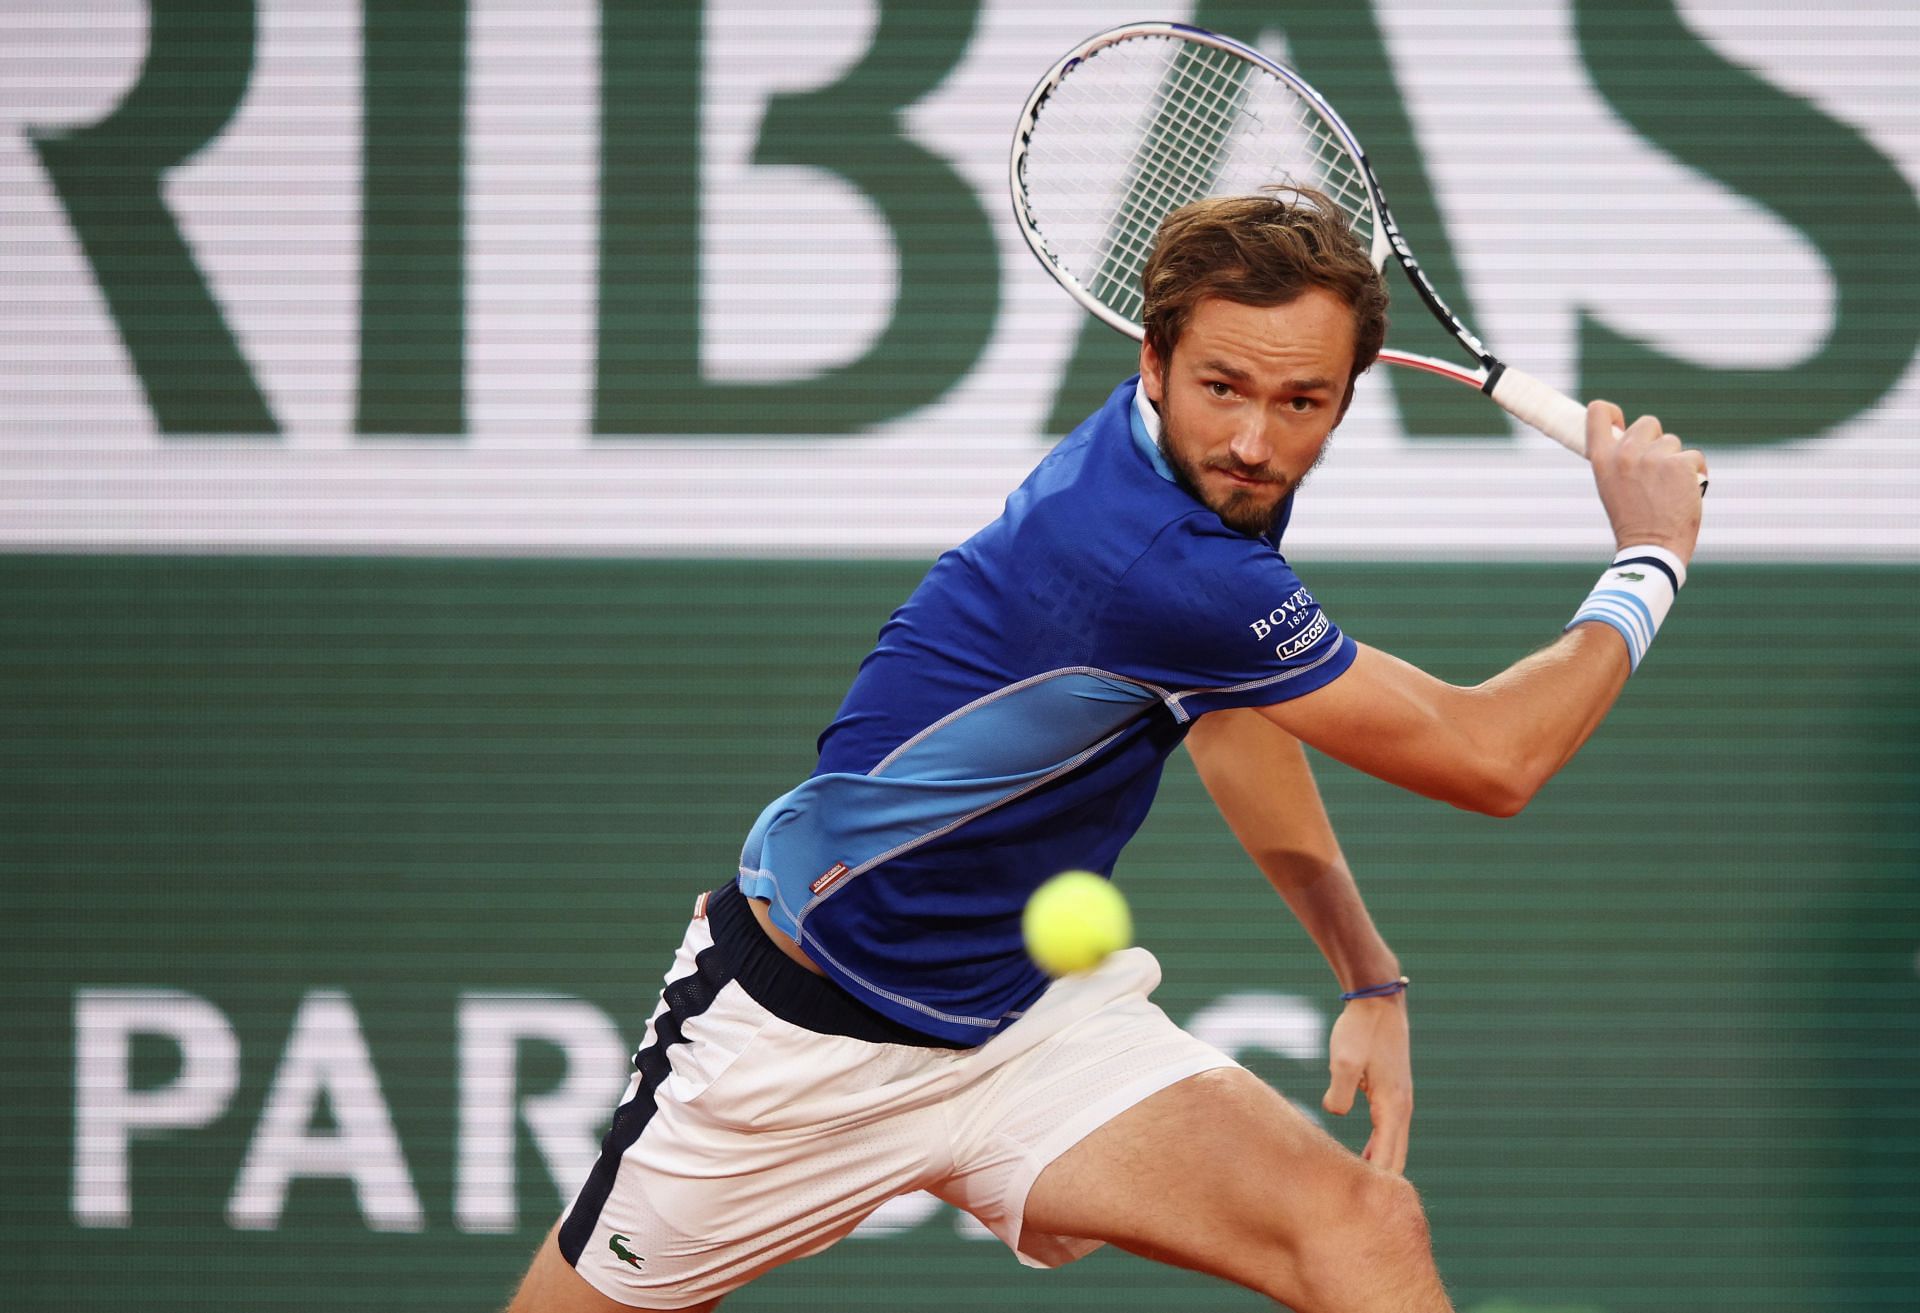 Medvedev will look to reach the semifinals of the Libema Open